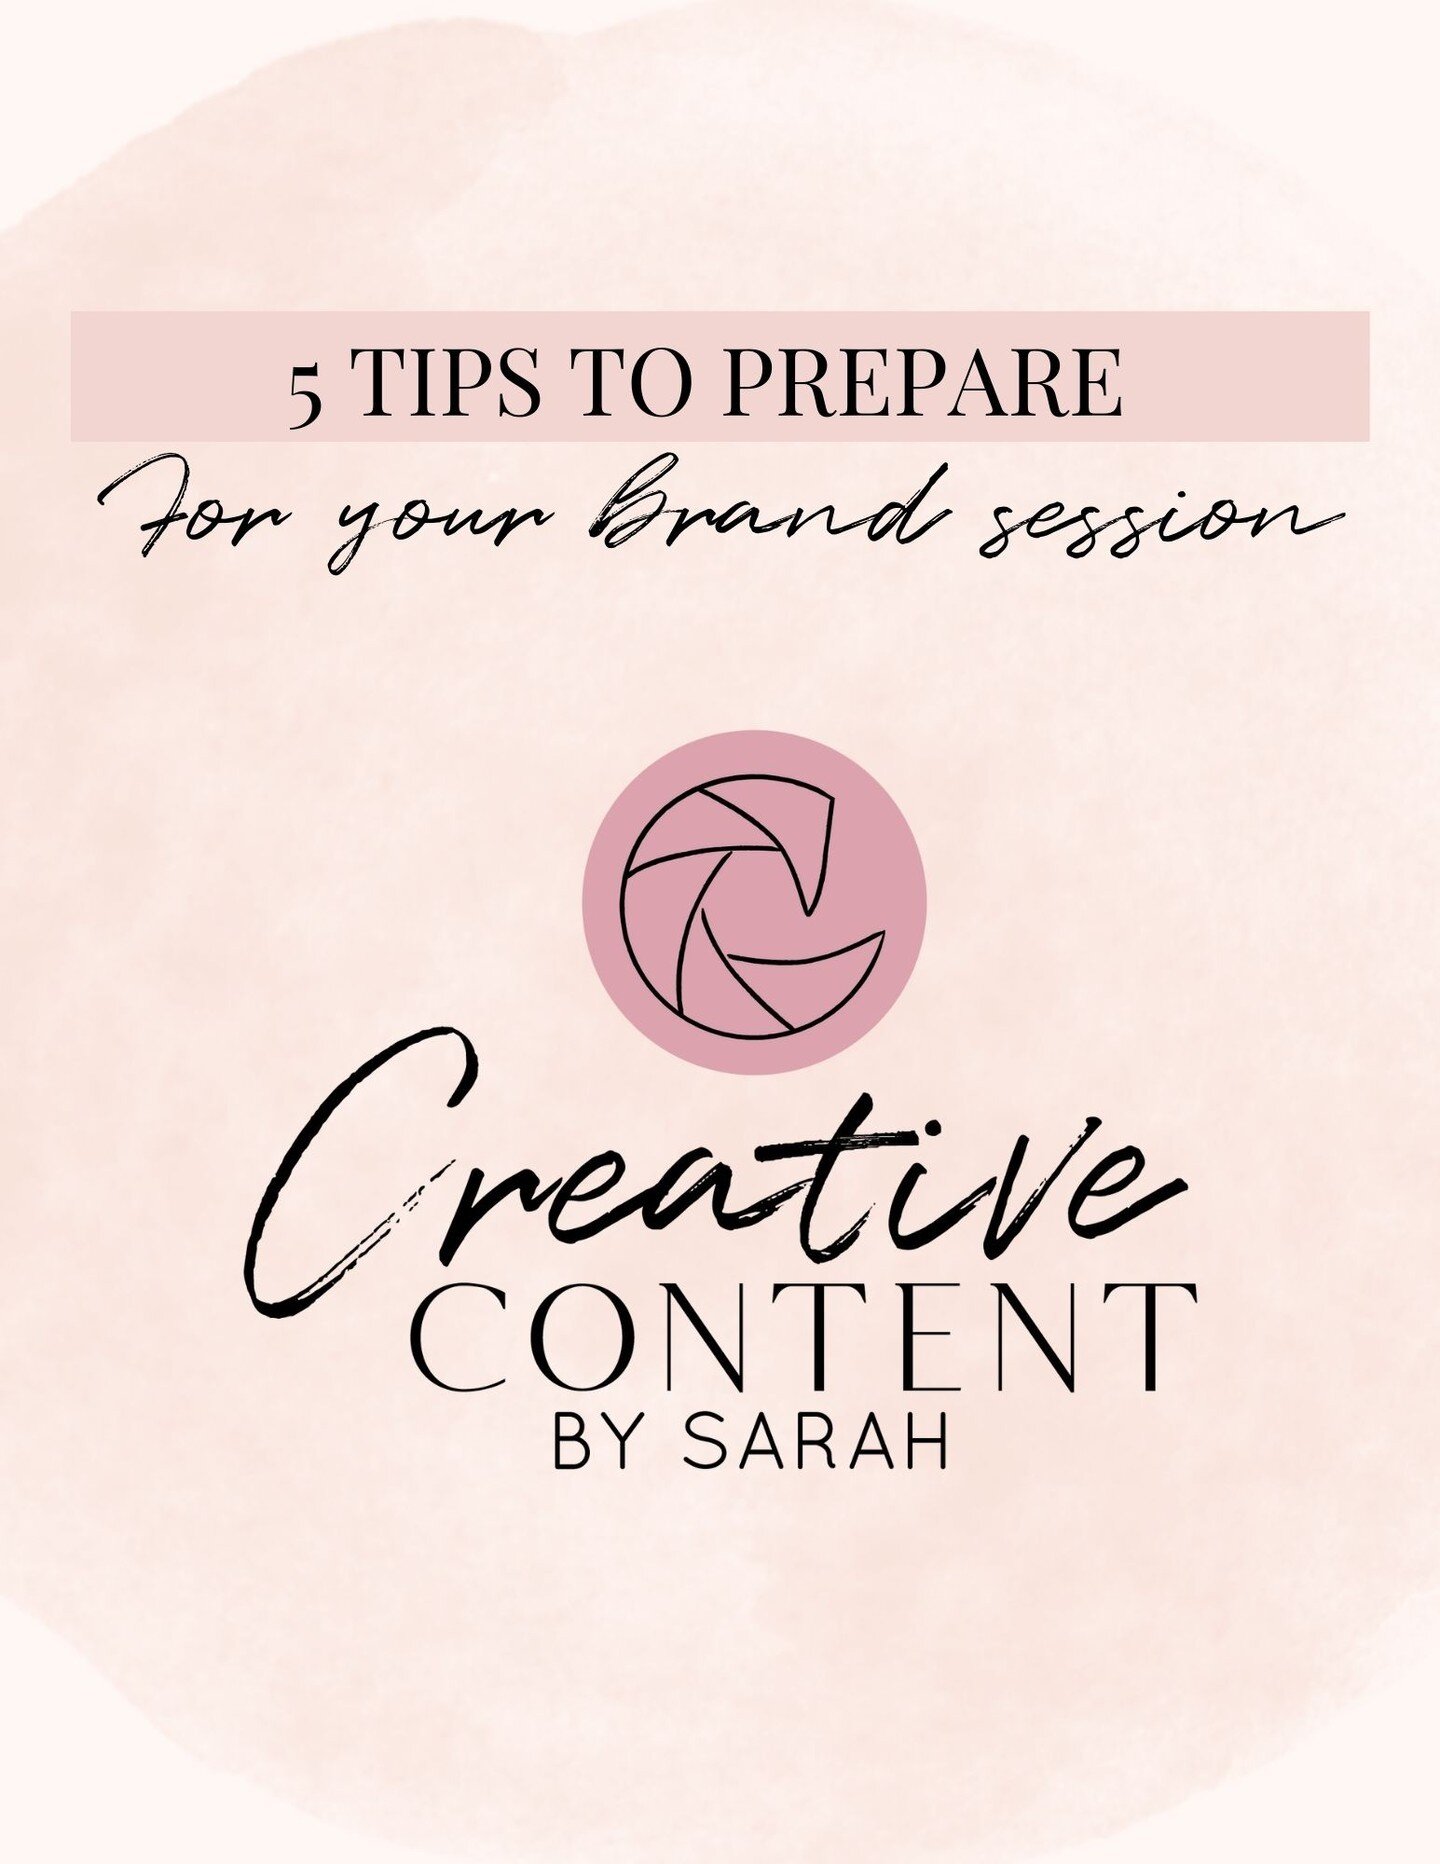 Today I'm bringing you my top 5 tips to prepare for your next branding session! 

Every business is different but the review and preparation for the session looks the same.  Go grab your freebie guide using the link in my bio! 
.
.
.
.
.
.
.
#texassm